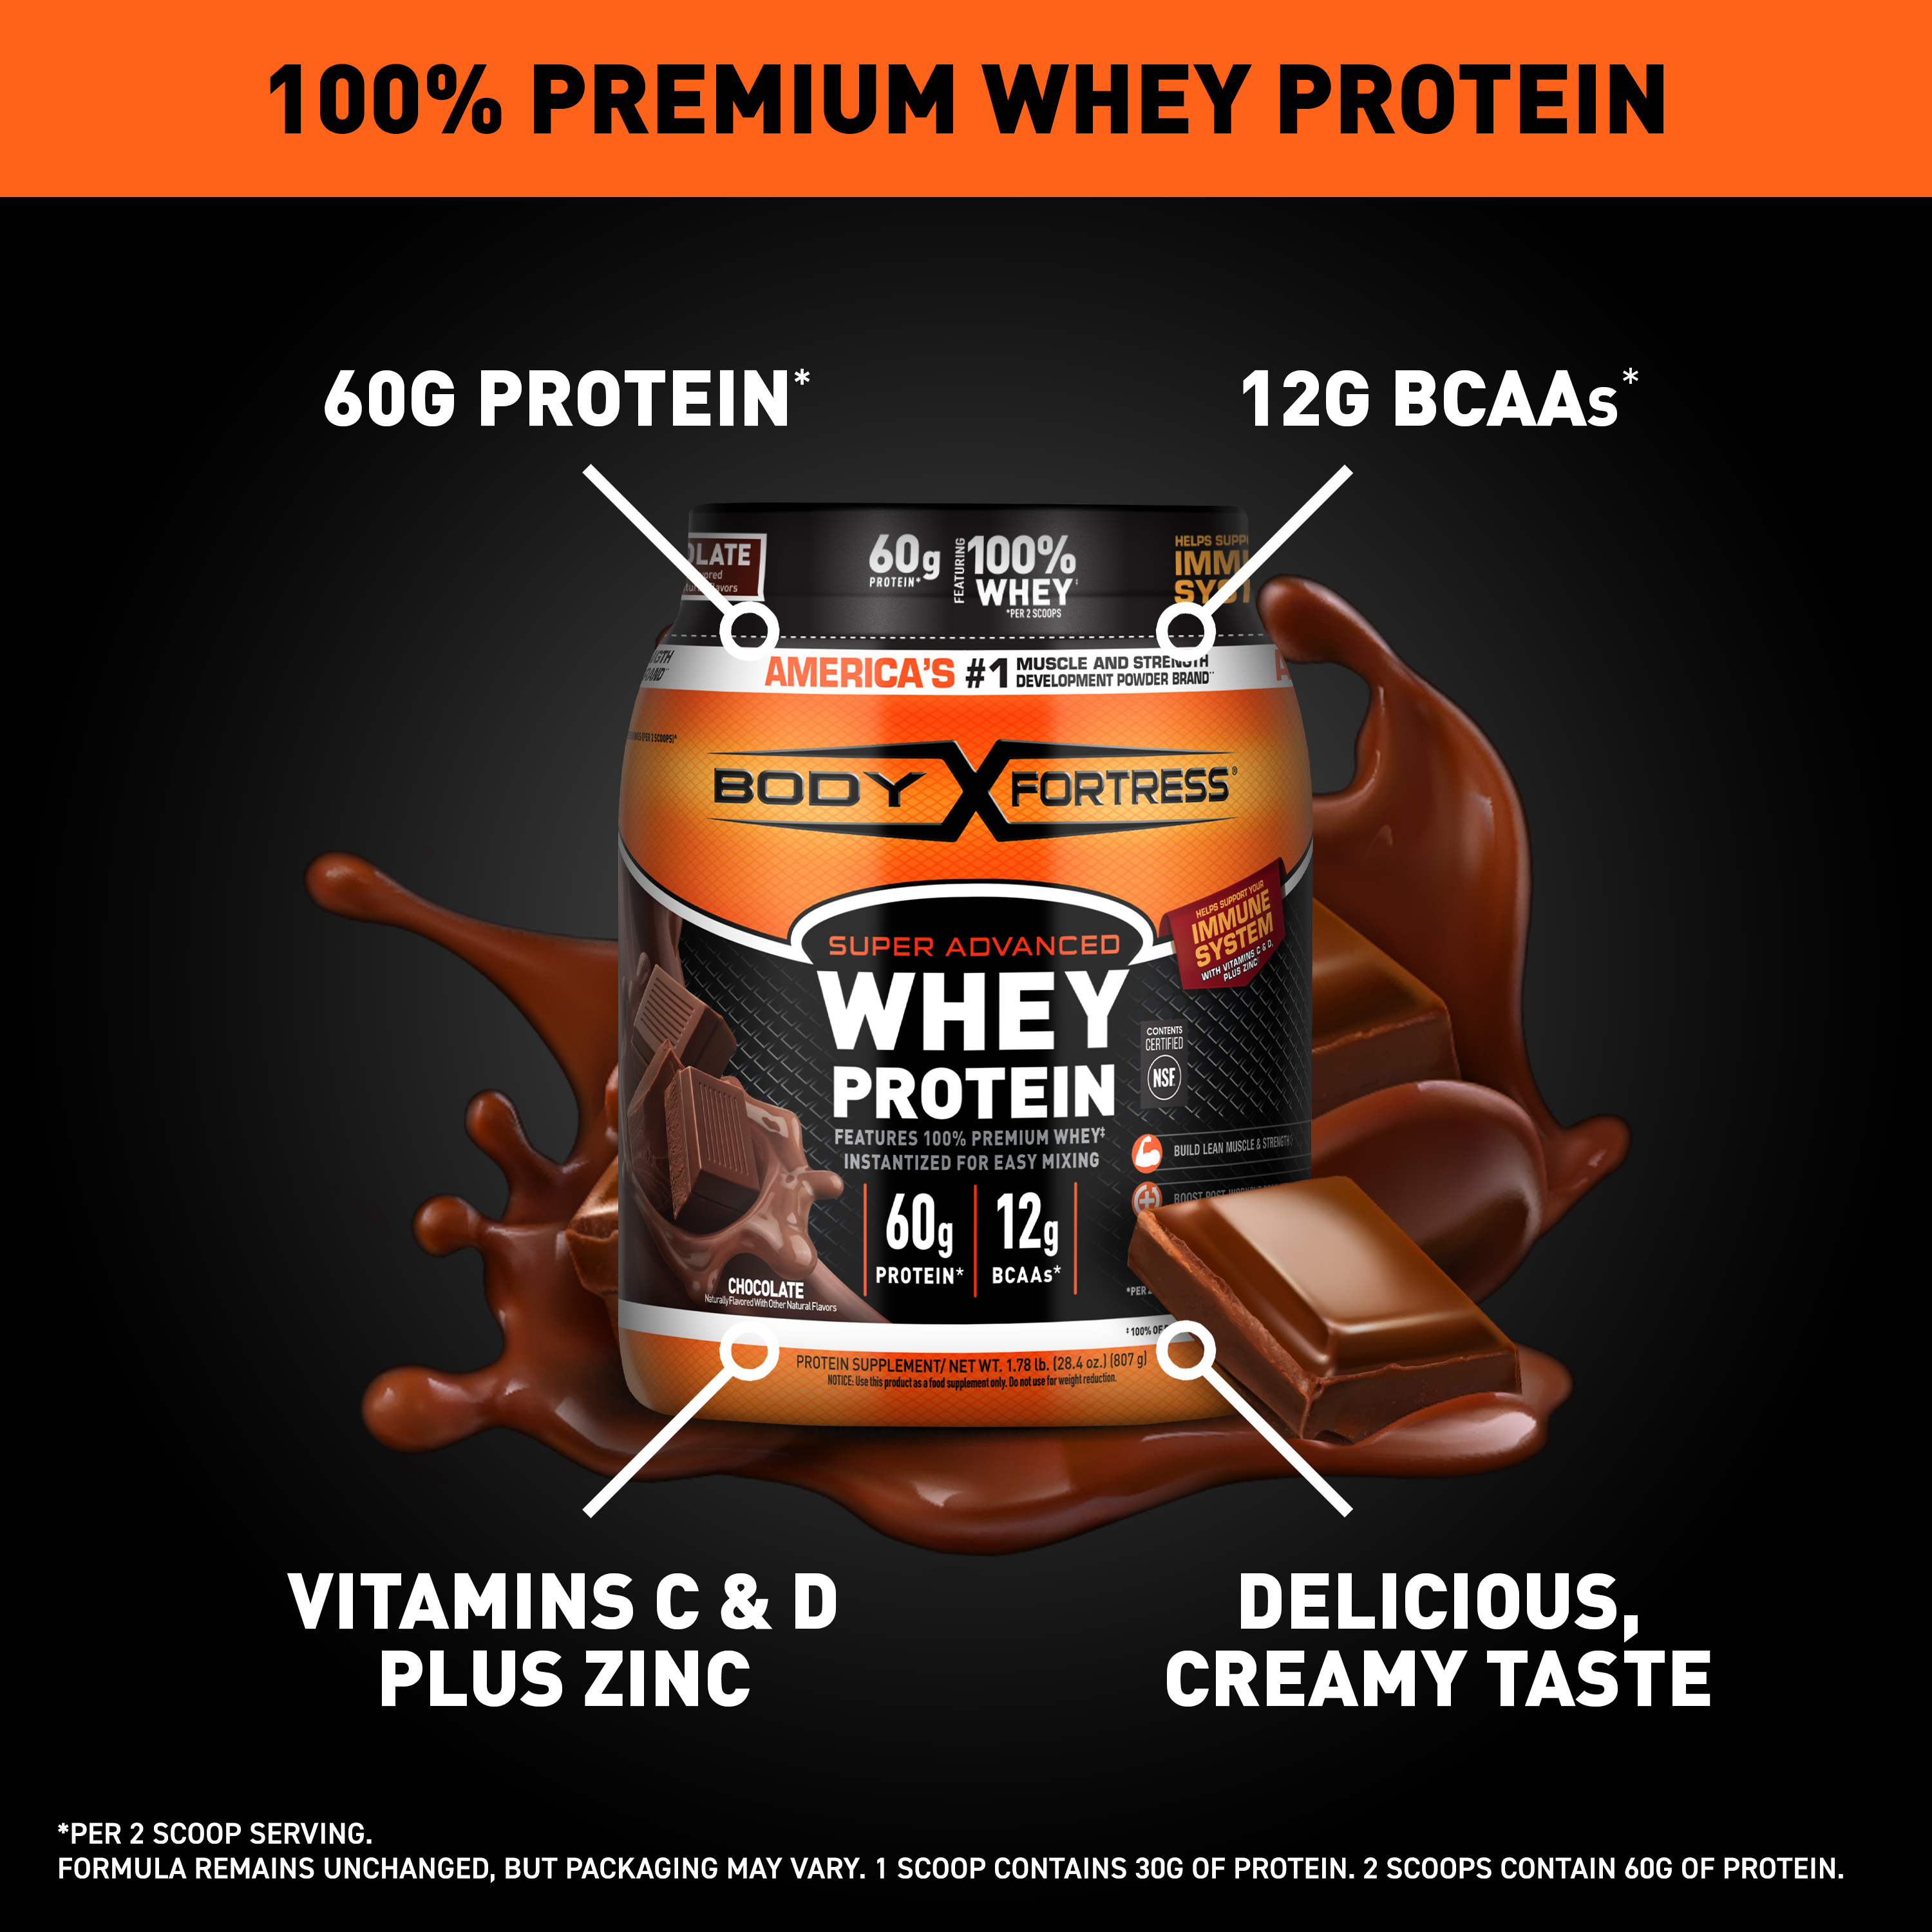 Body Fortress 100% Whey, Premium Protein Powder, Chocolate, 1.78lbs (Packaging May Vary) - image 2 of 7